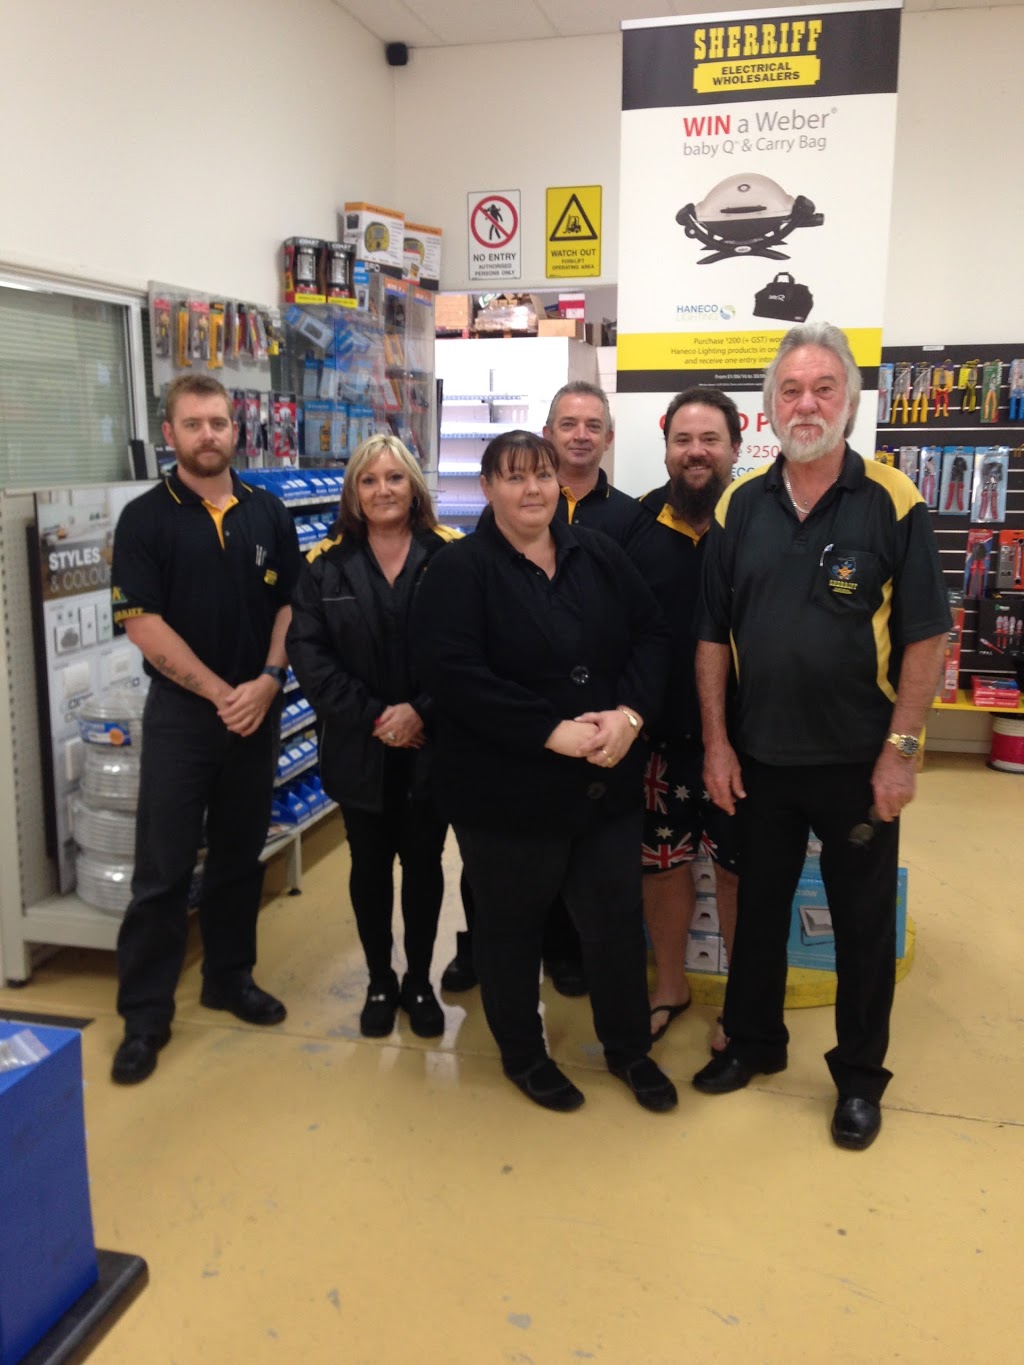 Sherriff Wholesale Electrical | store | 20 Chapple St, Gympie QLD 4570, Australia | 0754811696 OR +61 7 5481 1696